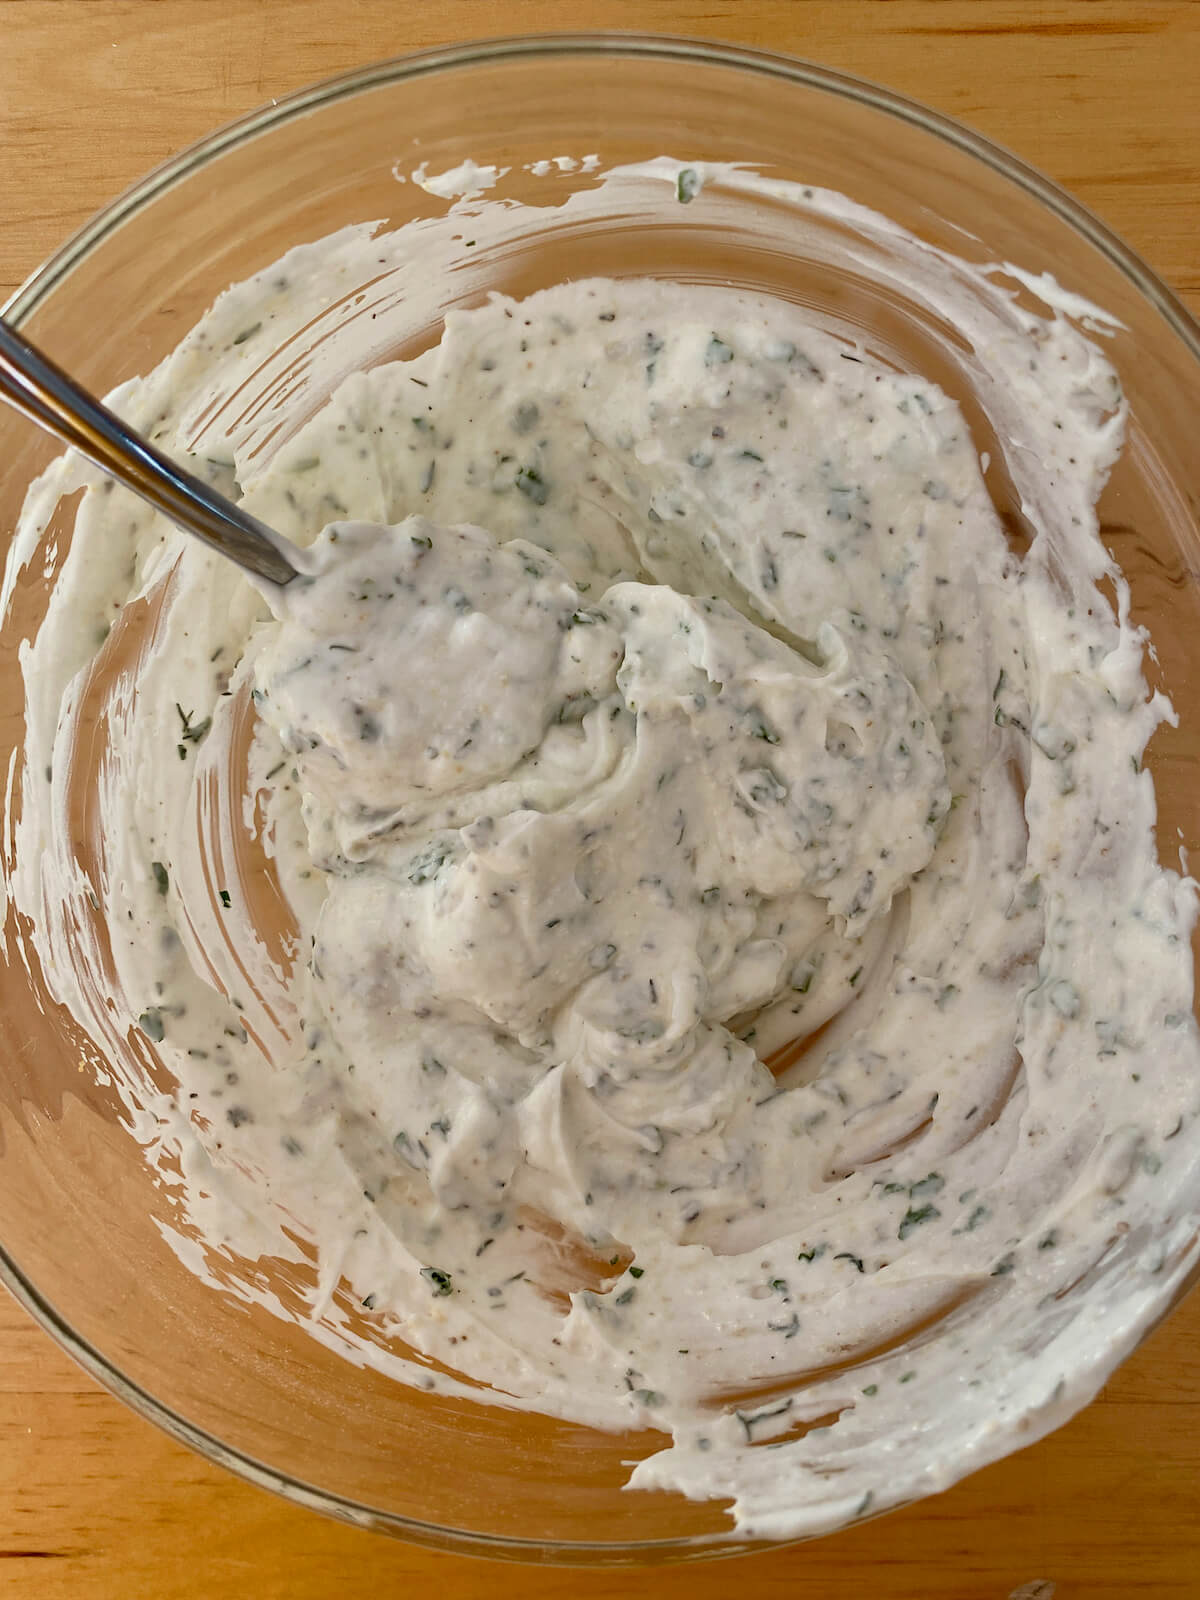 Greek yogurt mixed with dried herbs and spices.